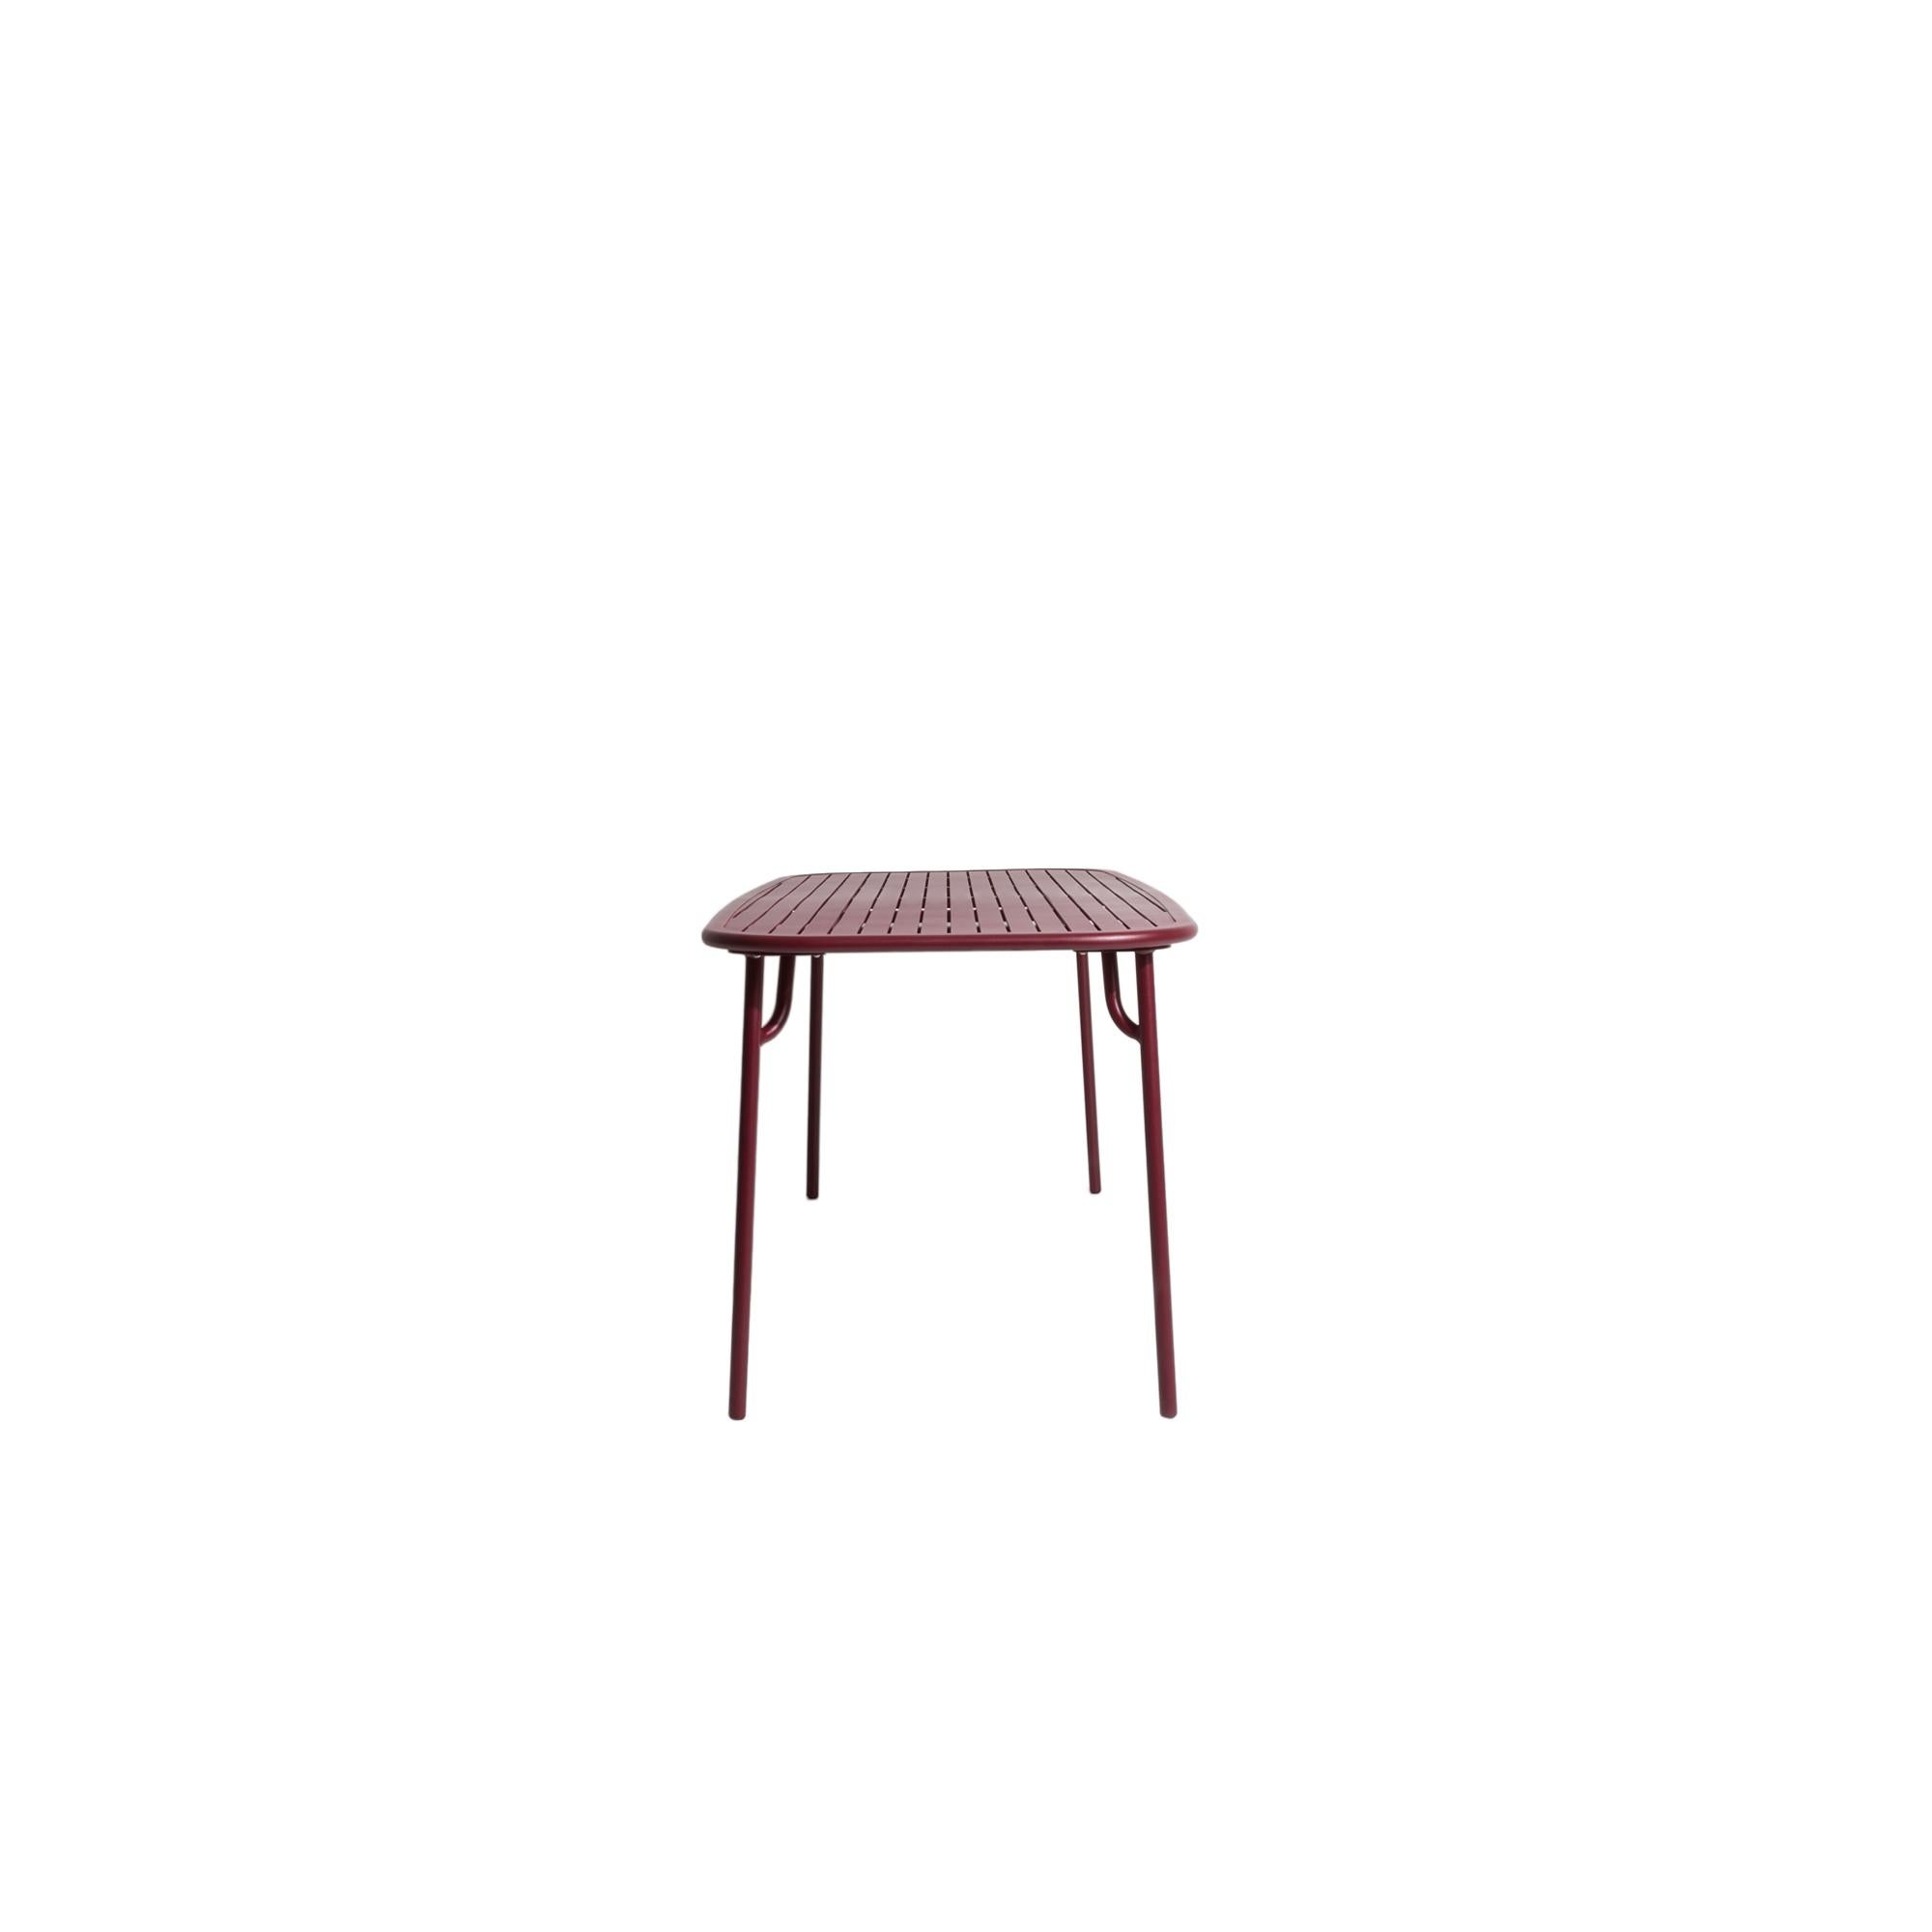 Chinese Petite Friture Week-End Medium Rectangular Dining Table in Burgundy with Slats  For Sale